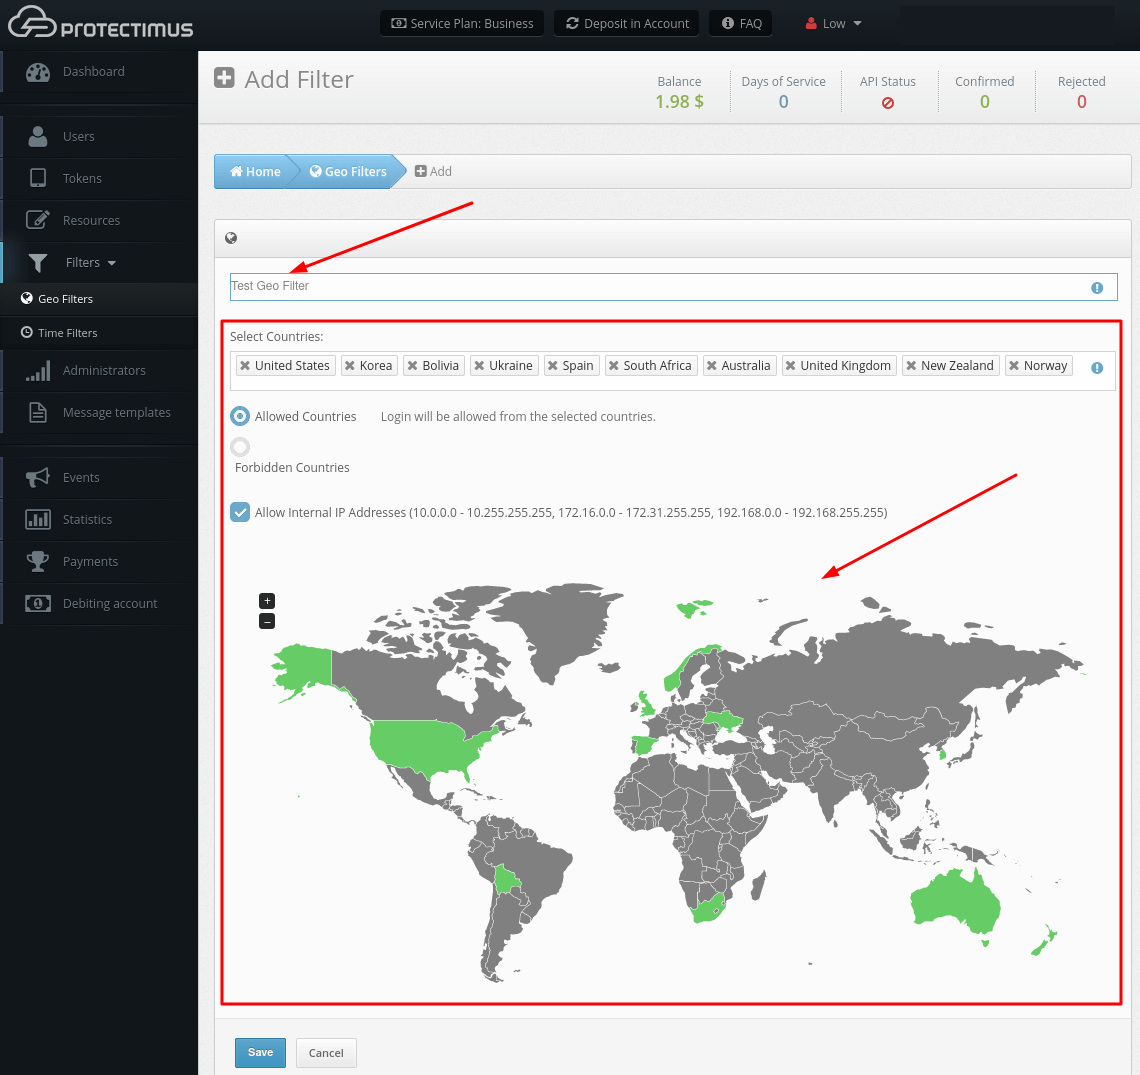 How to add Geo Filters in Protectimus 2-factor authentication system - name the filter and select the necessary countries